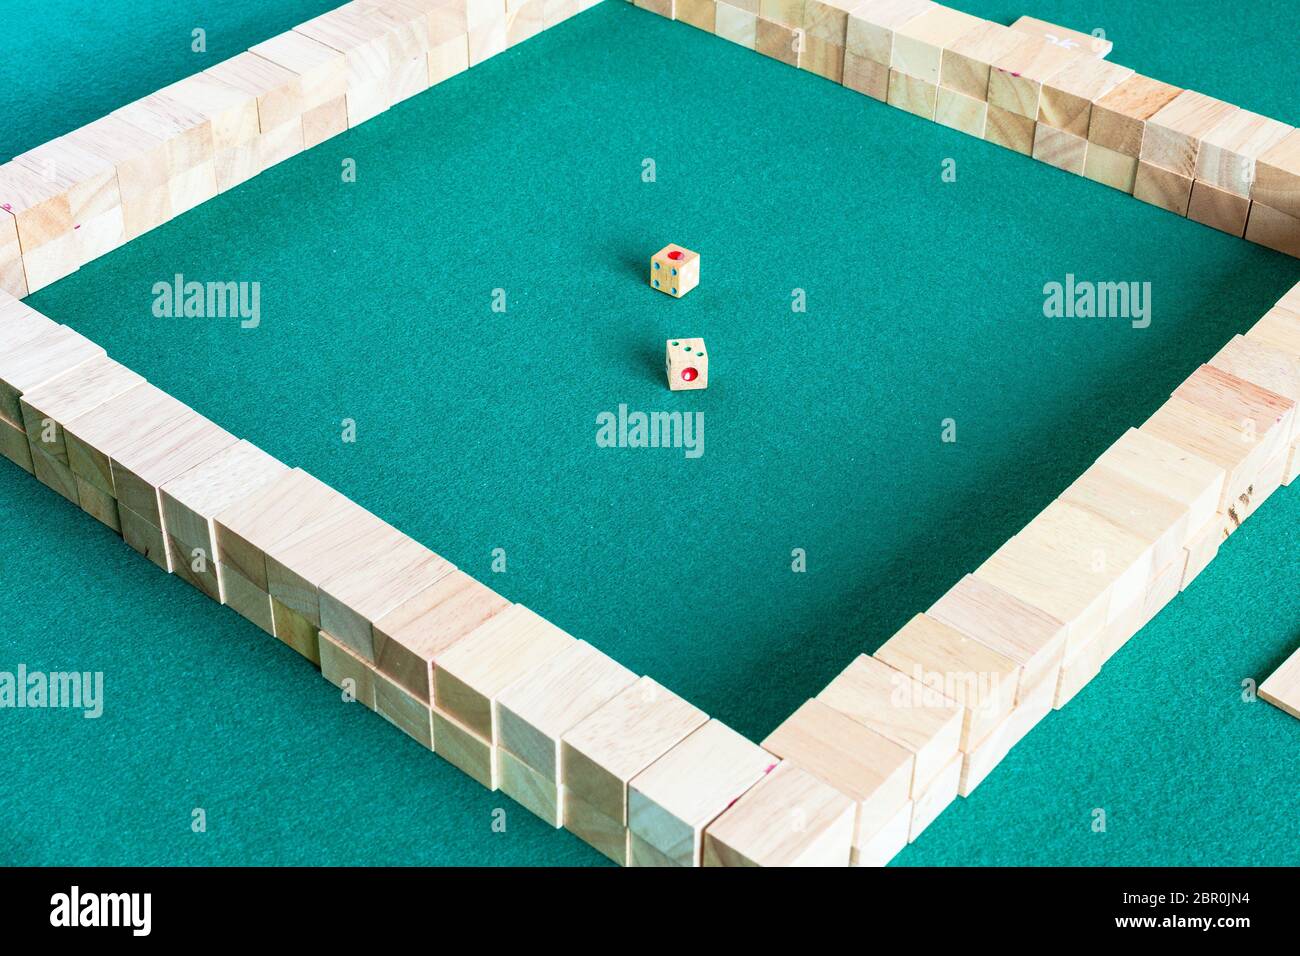 starting position of mahjong, tile-based chinese strategy board game on green baize table Stock Photo